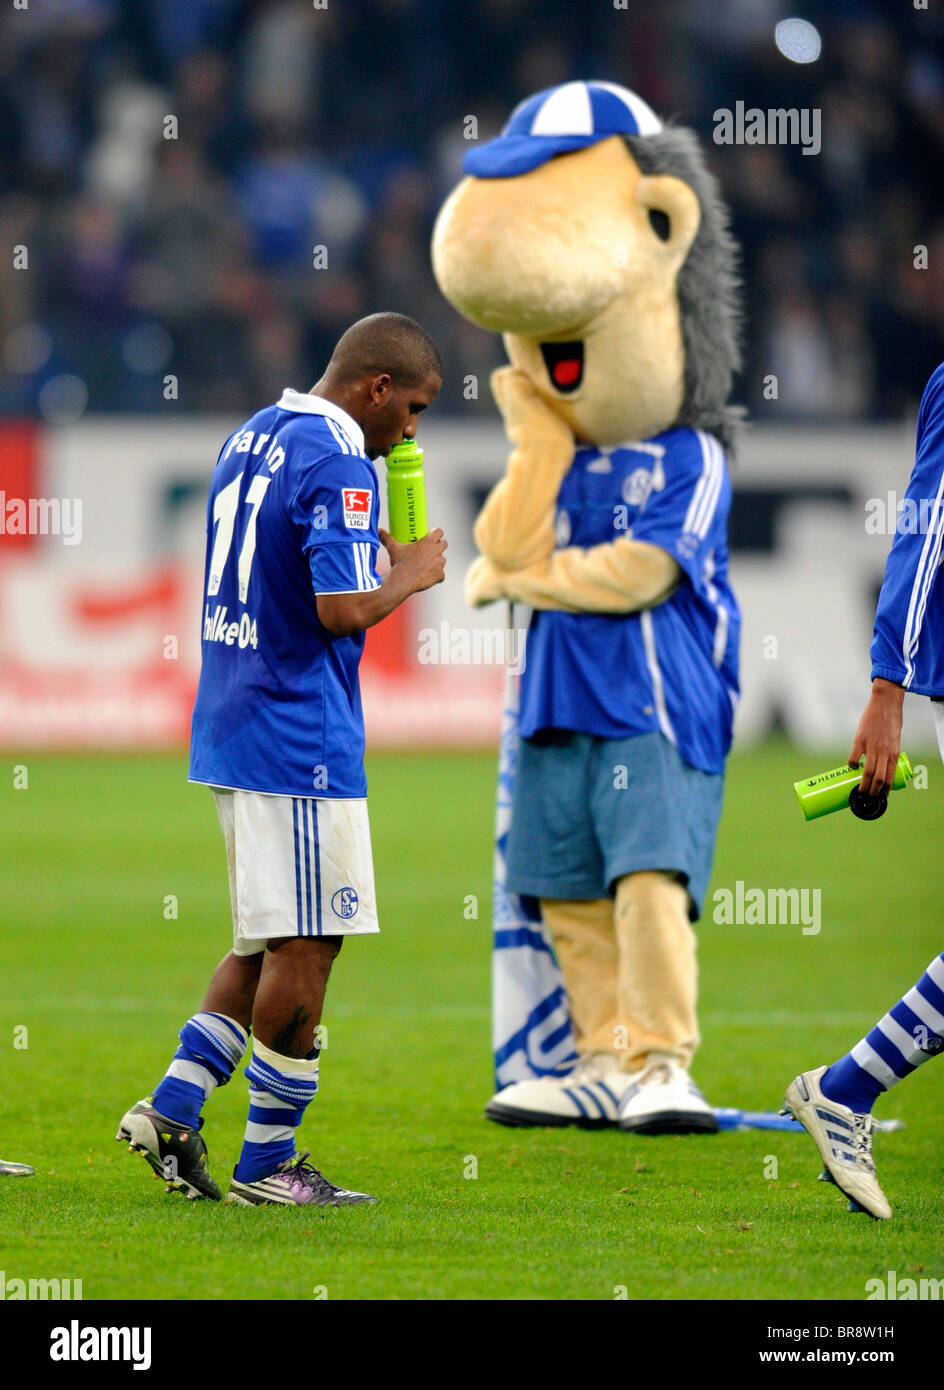 Jefferson Farfan and Erwin the mascot of Schalke, frustrated after the match. Stock Photo